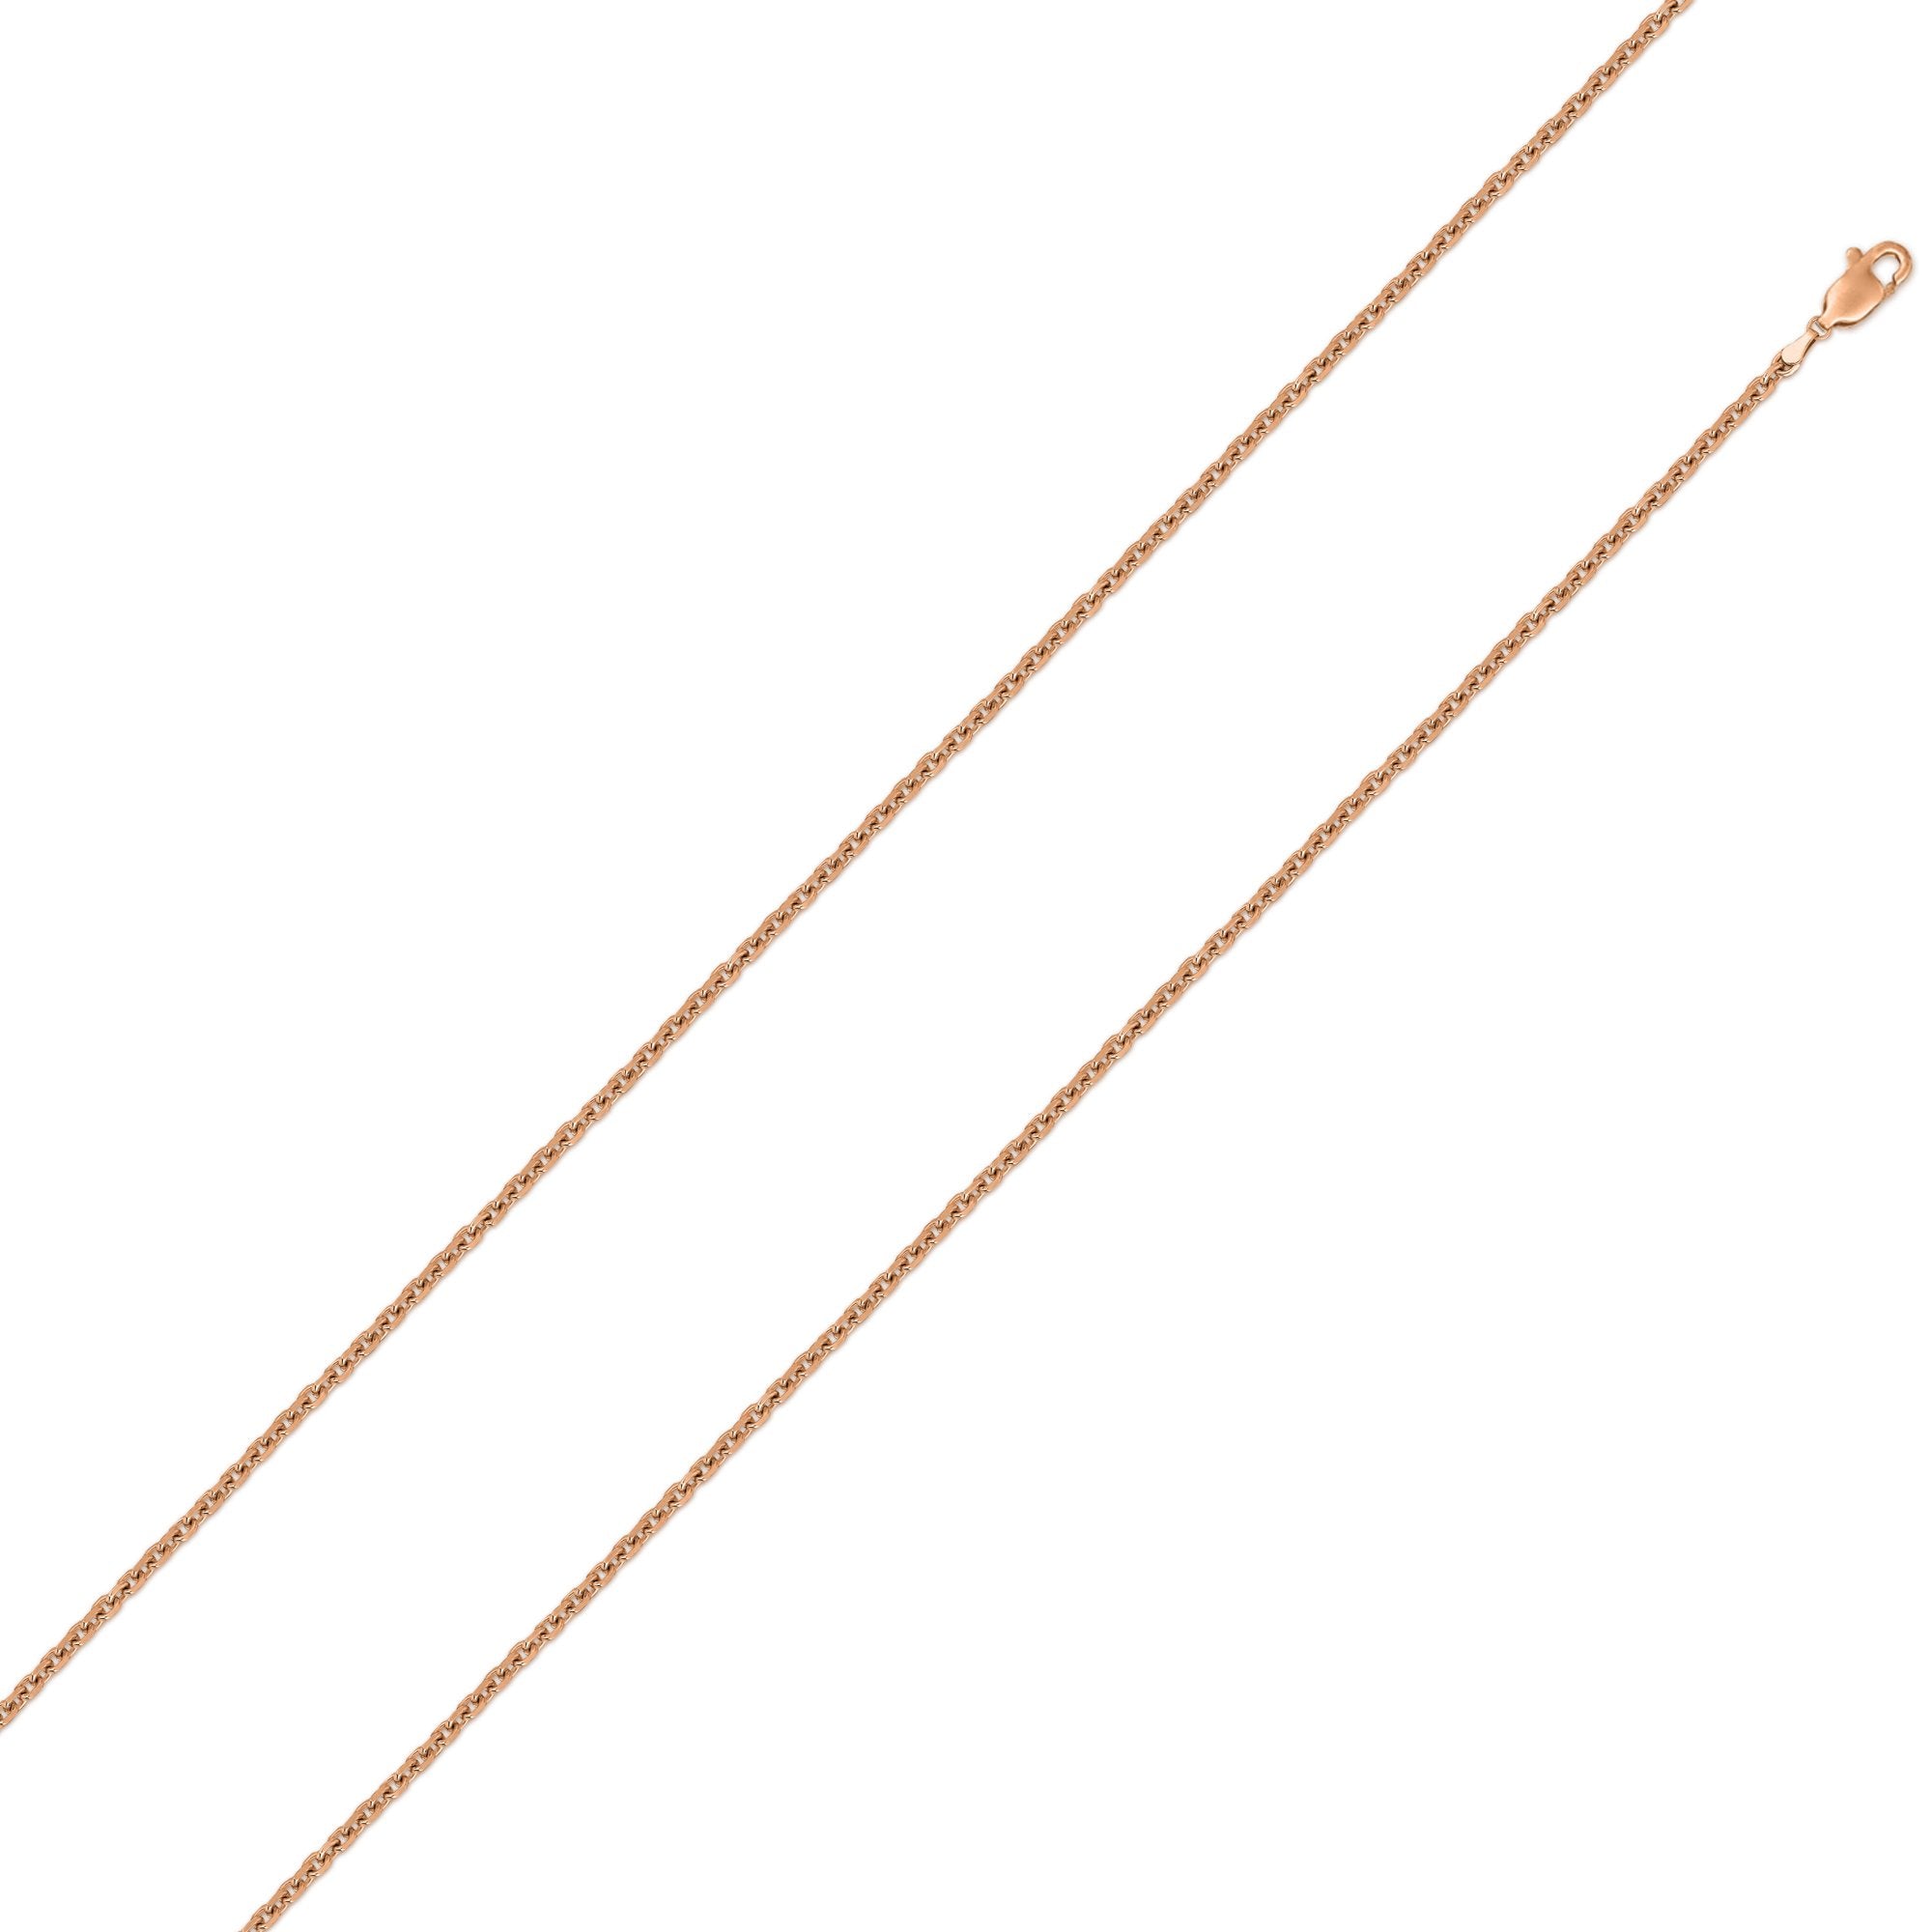 10K Rose Gold 0.5mm Cable Diamond Cut Chain